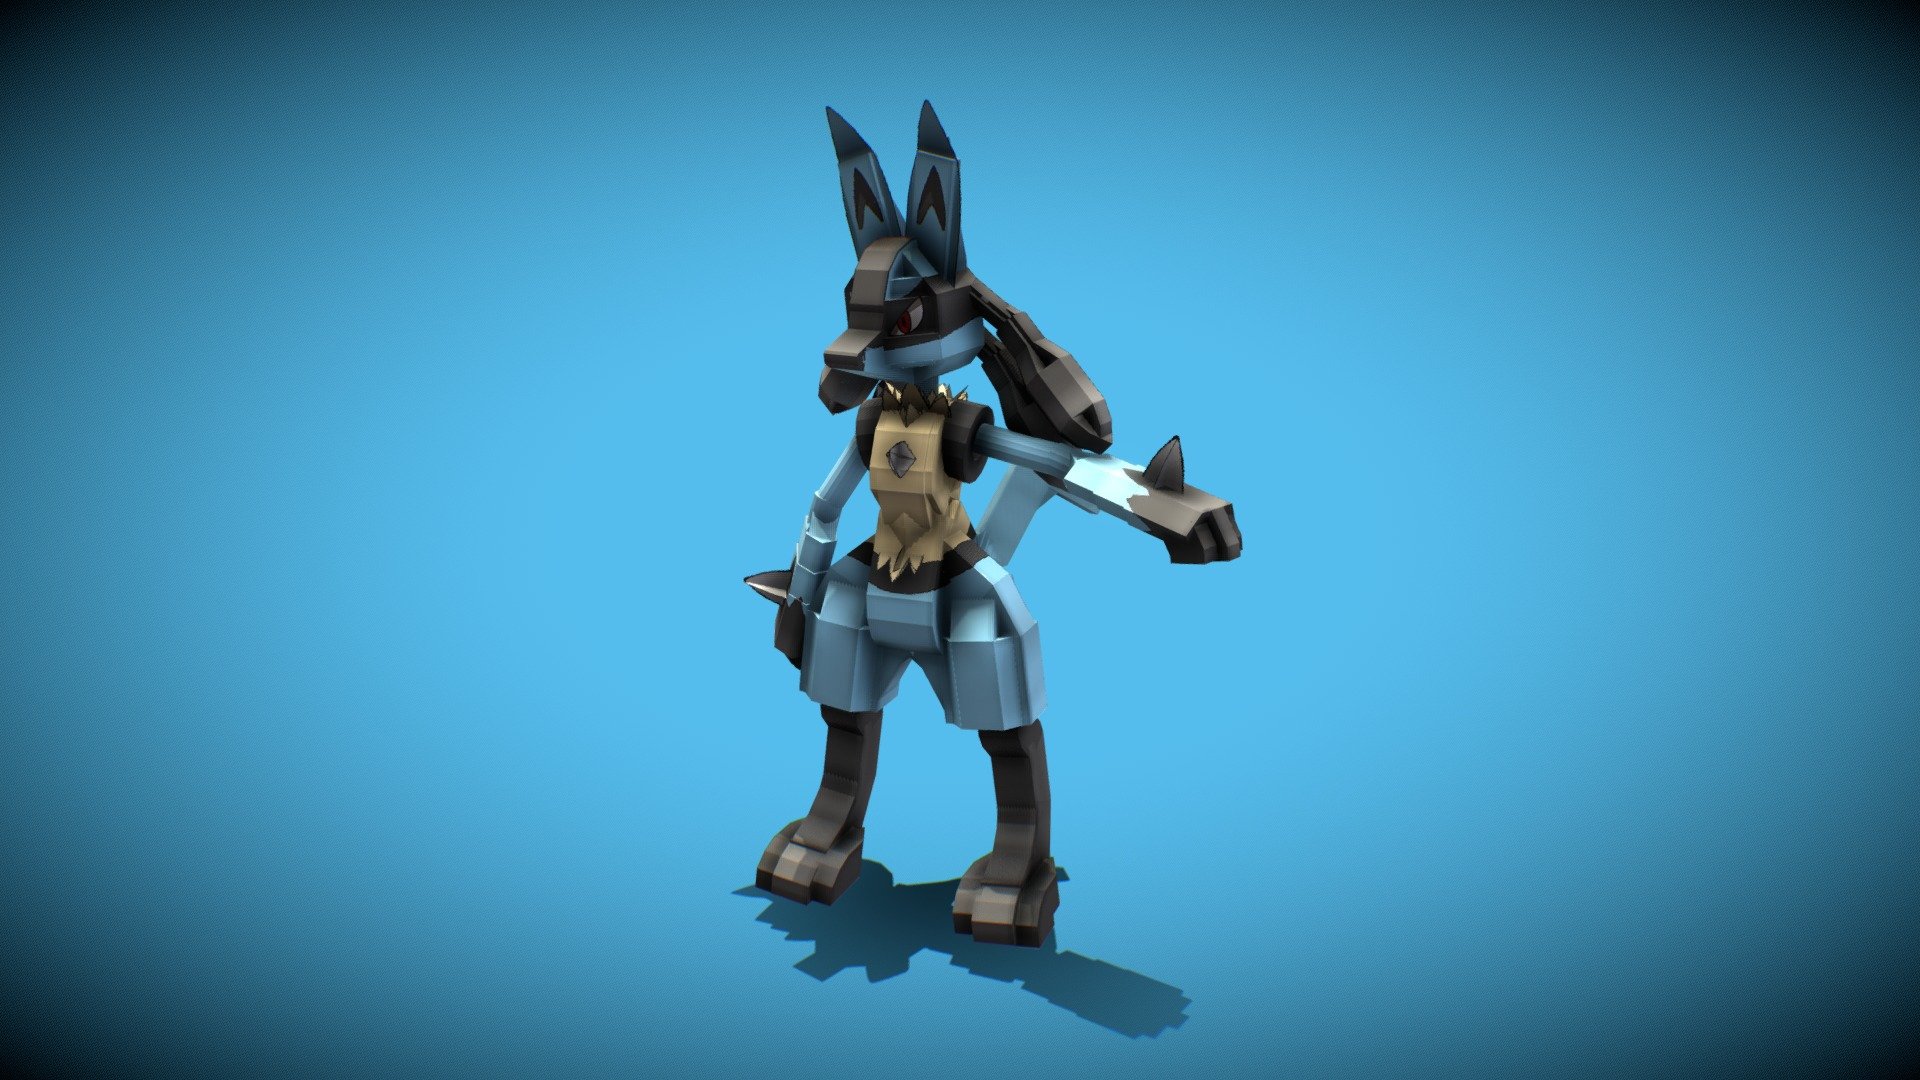 This model has made by BlockBench for Minecraft Java Edition (No-mods). 
Artist: ASTRICK DISCORD: ASTRICK#1775 - Pokemon Lucario - 3D model by QuartekStudio 3d model